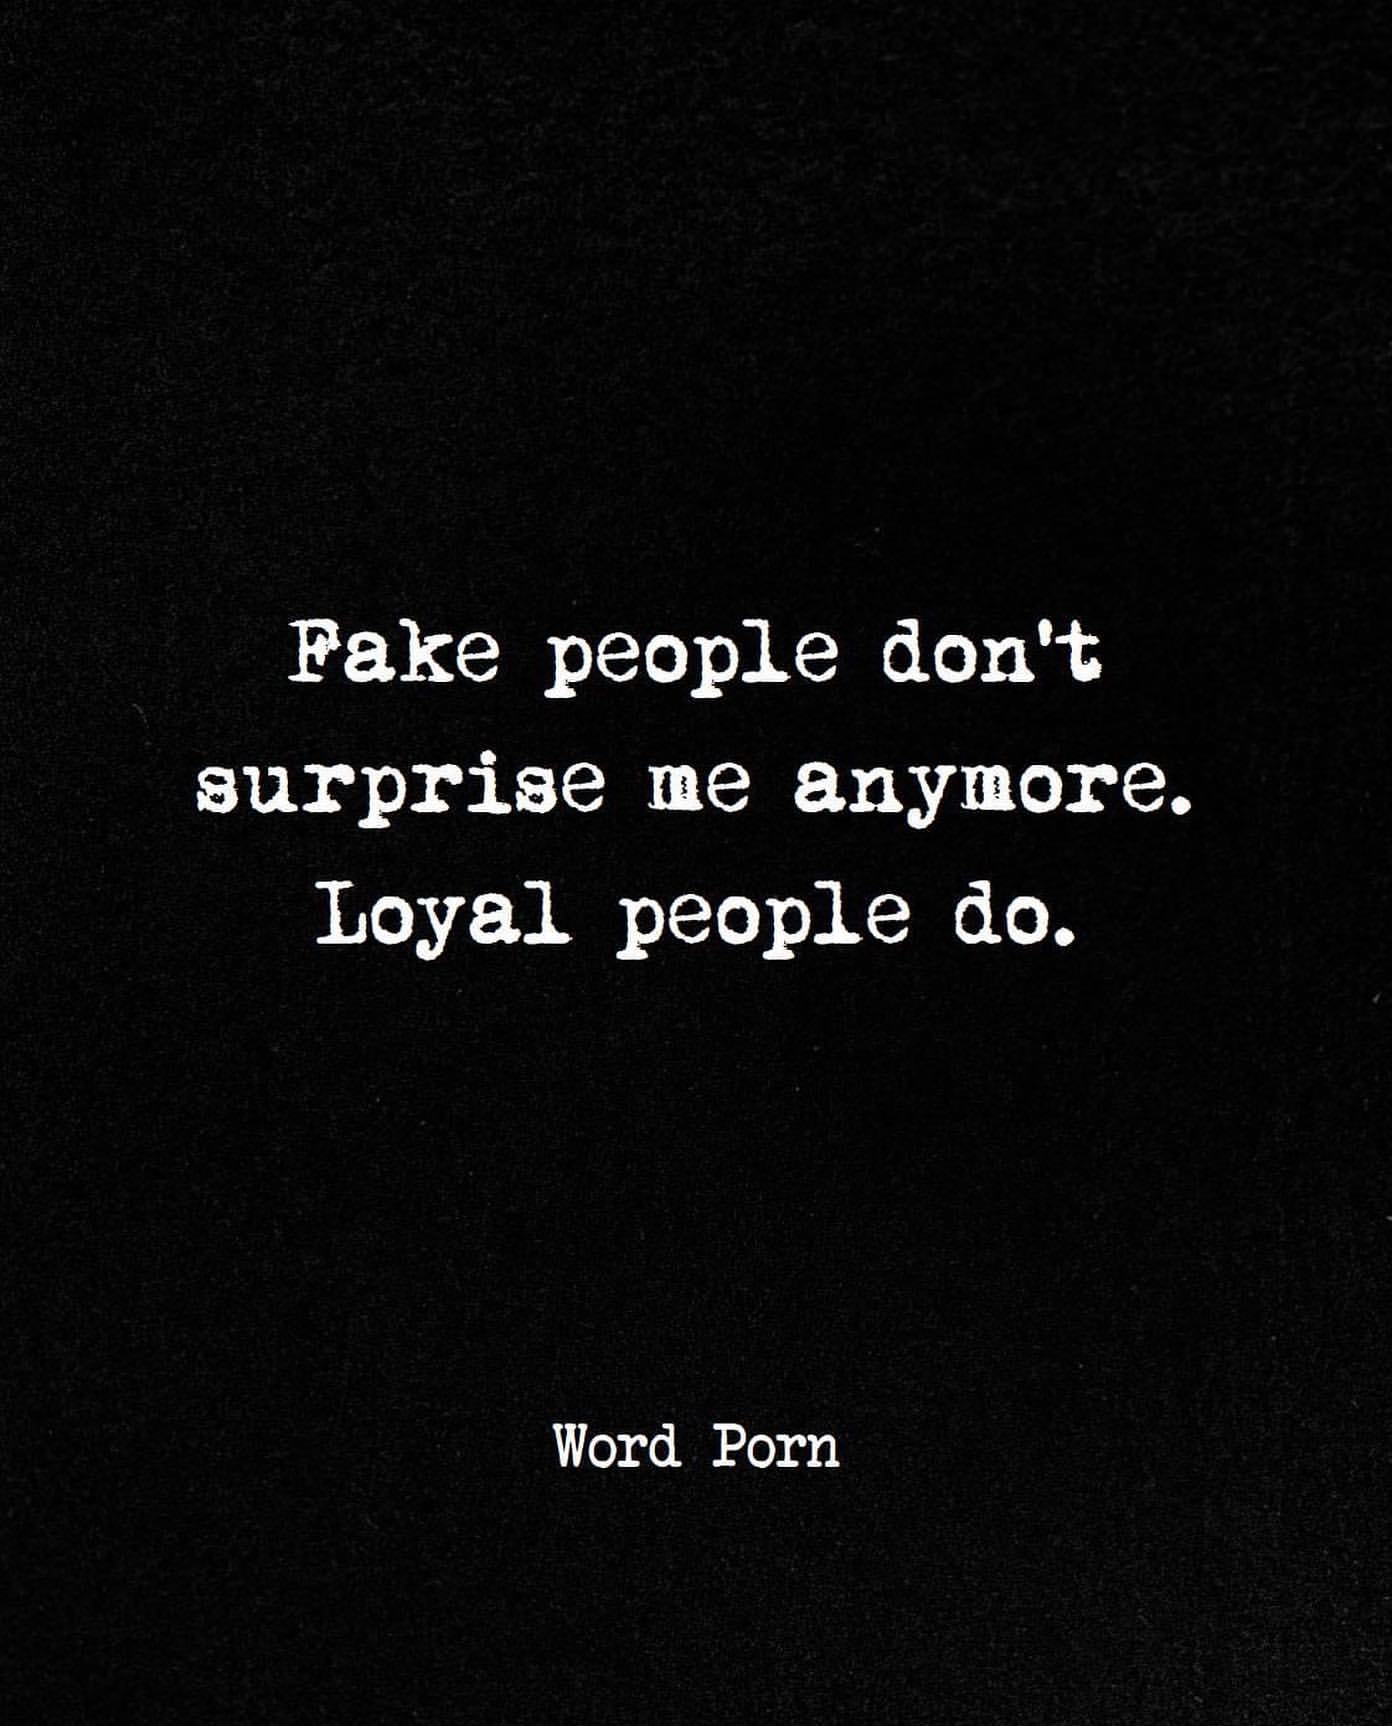 Fake people don't surprise me anymore. Loyal people do. - Phrases